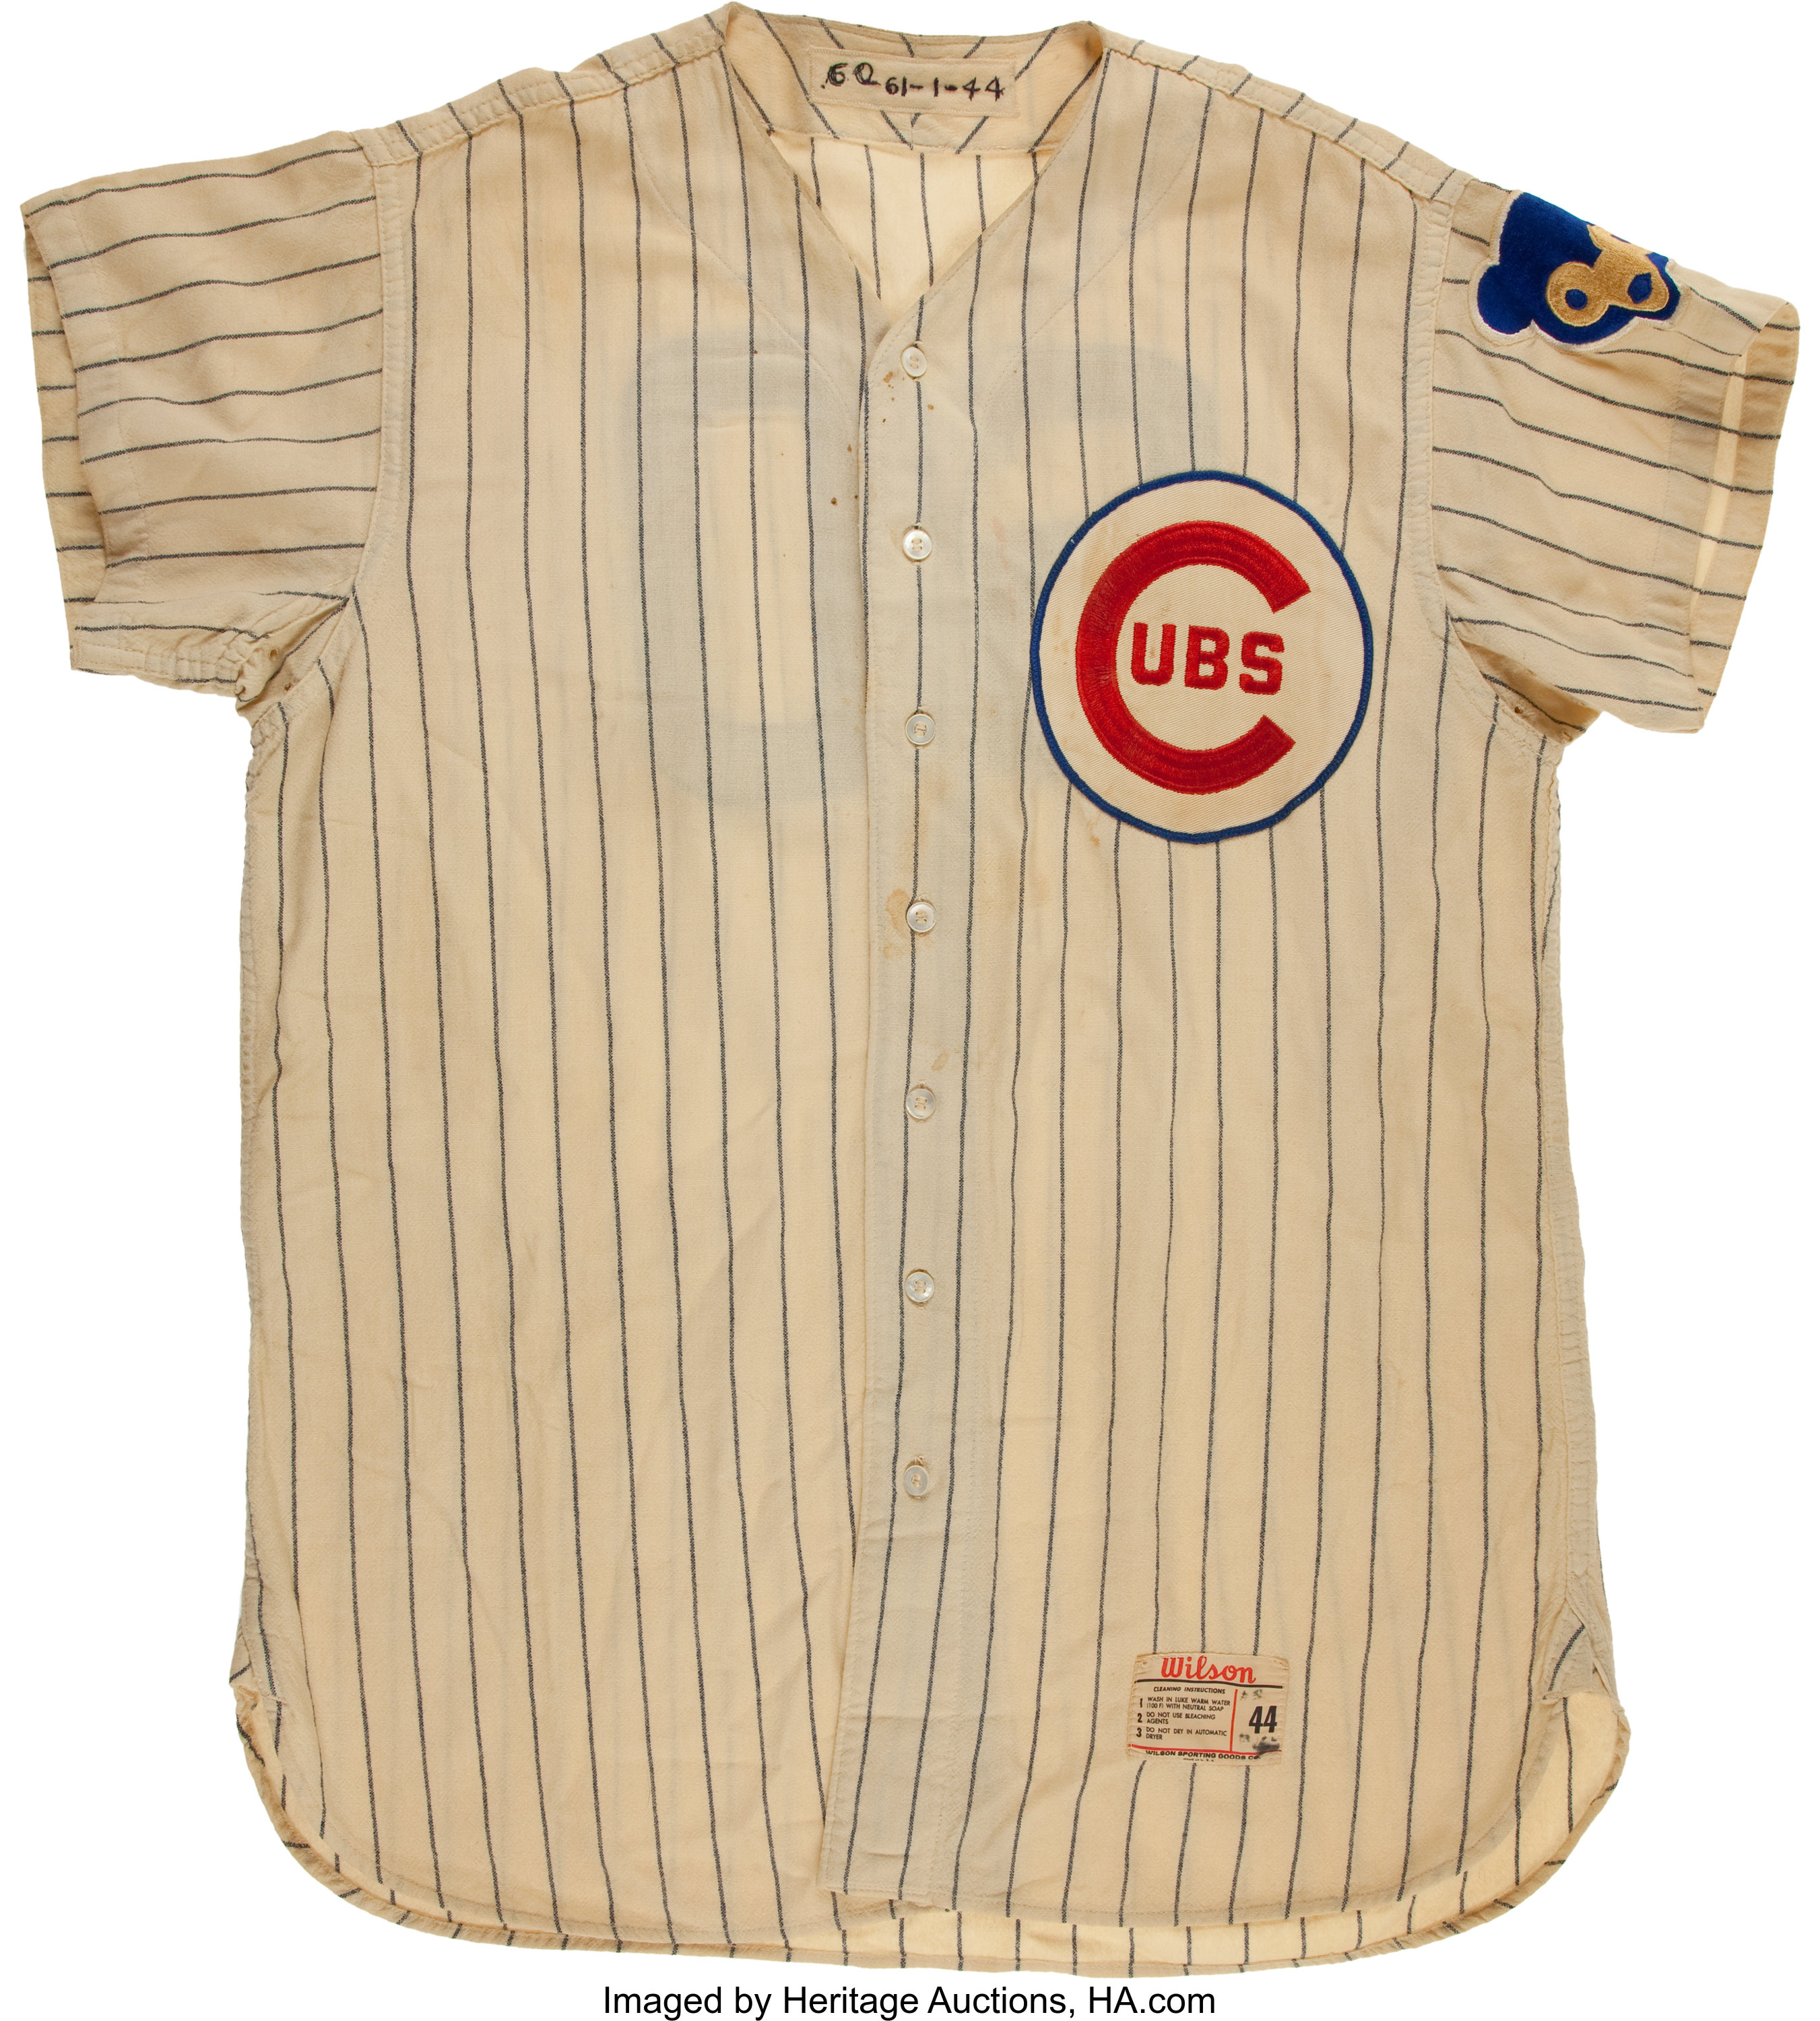 throwback chicago cubs jersey